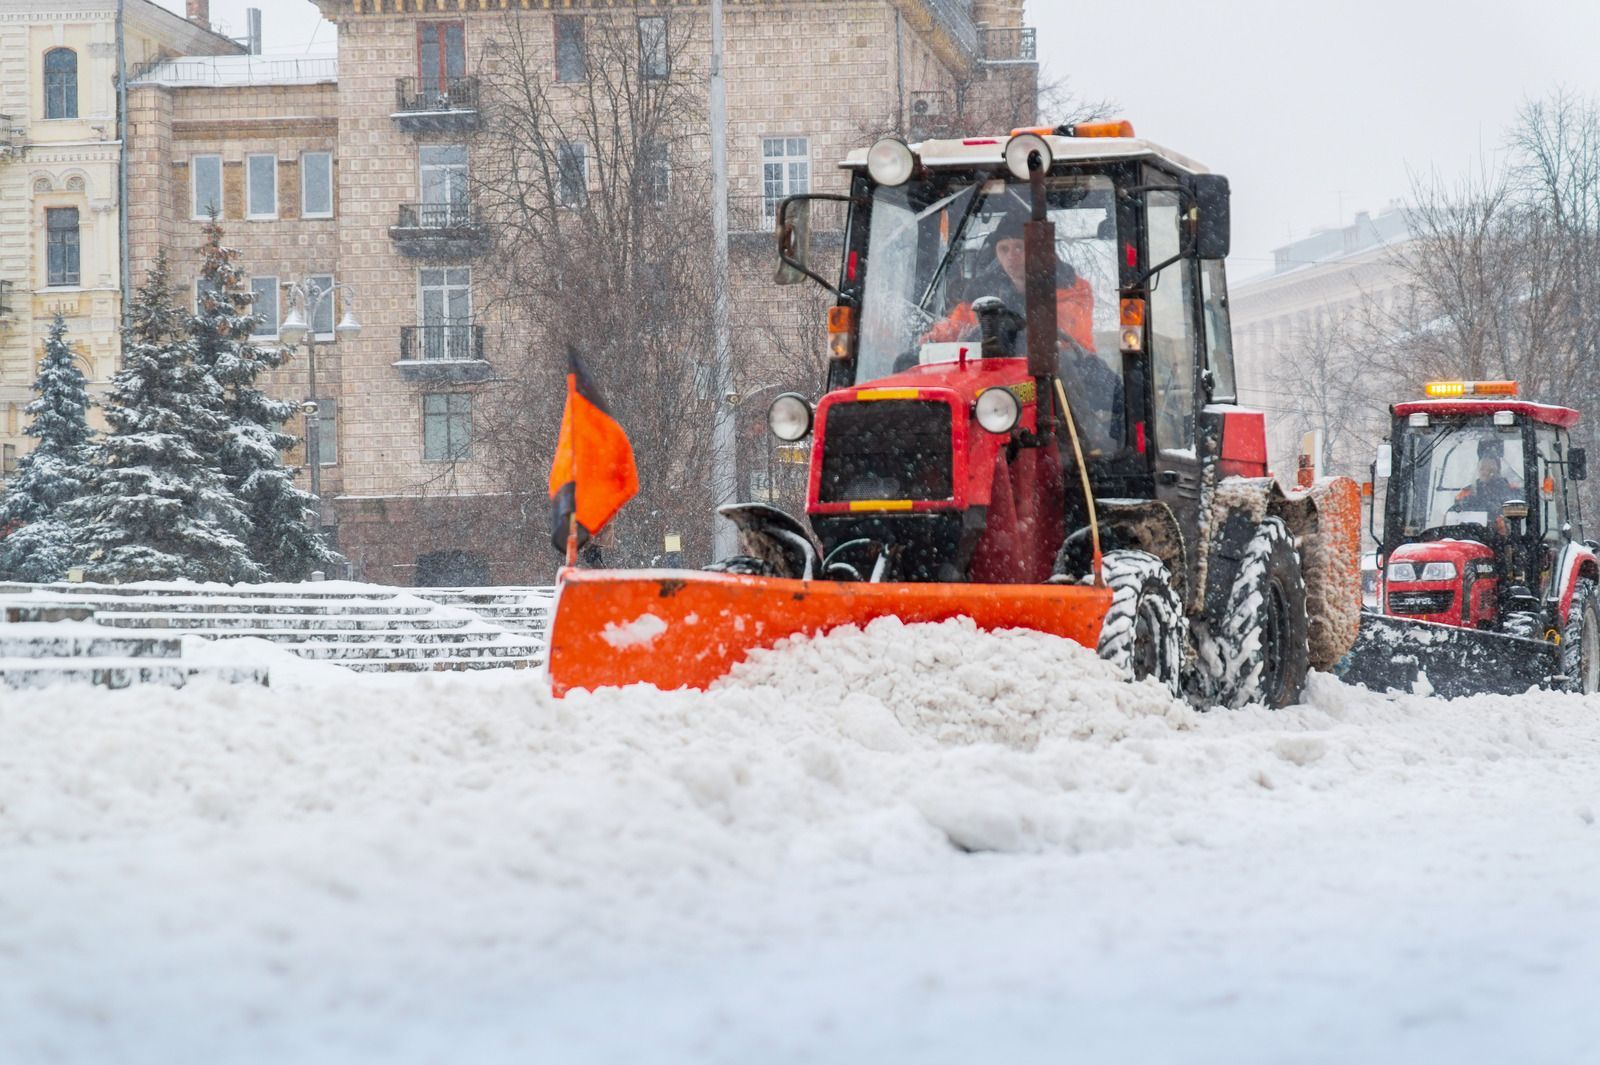 Commercial Snow Removal